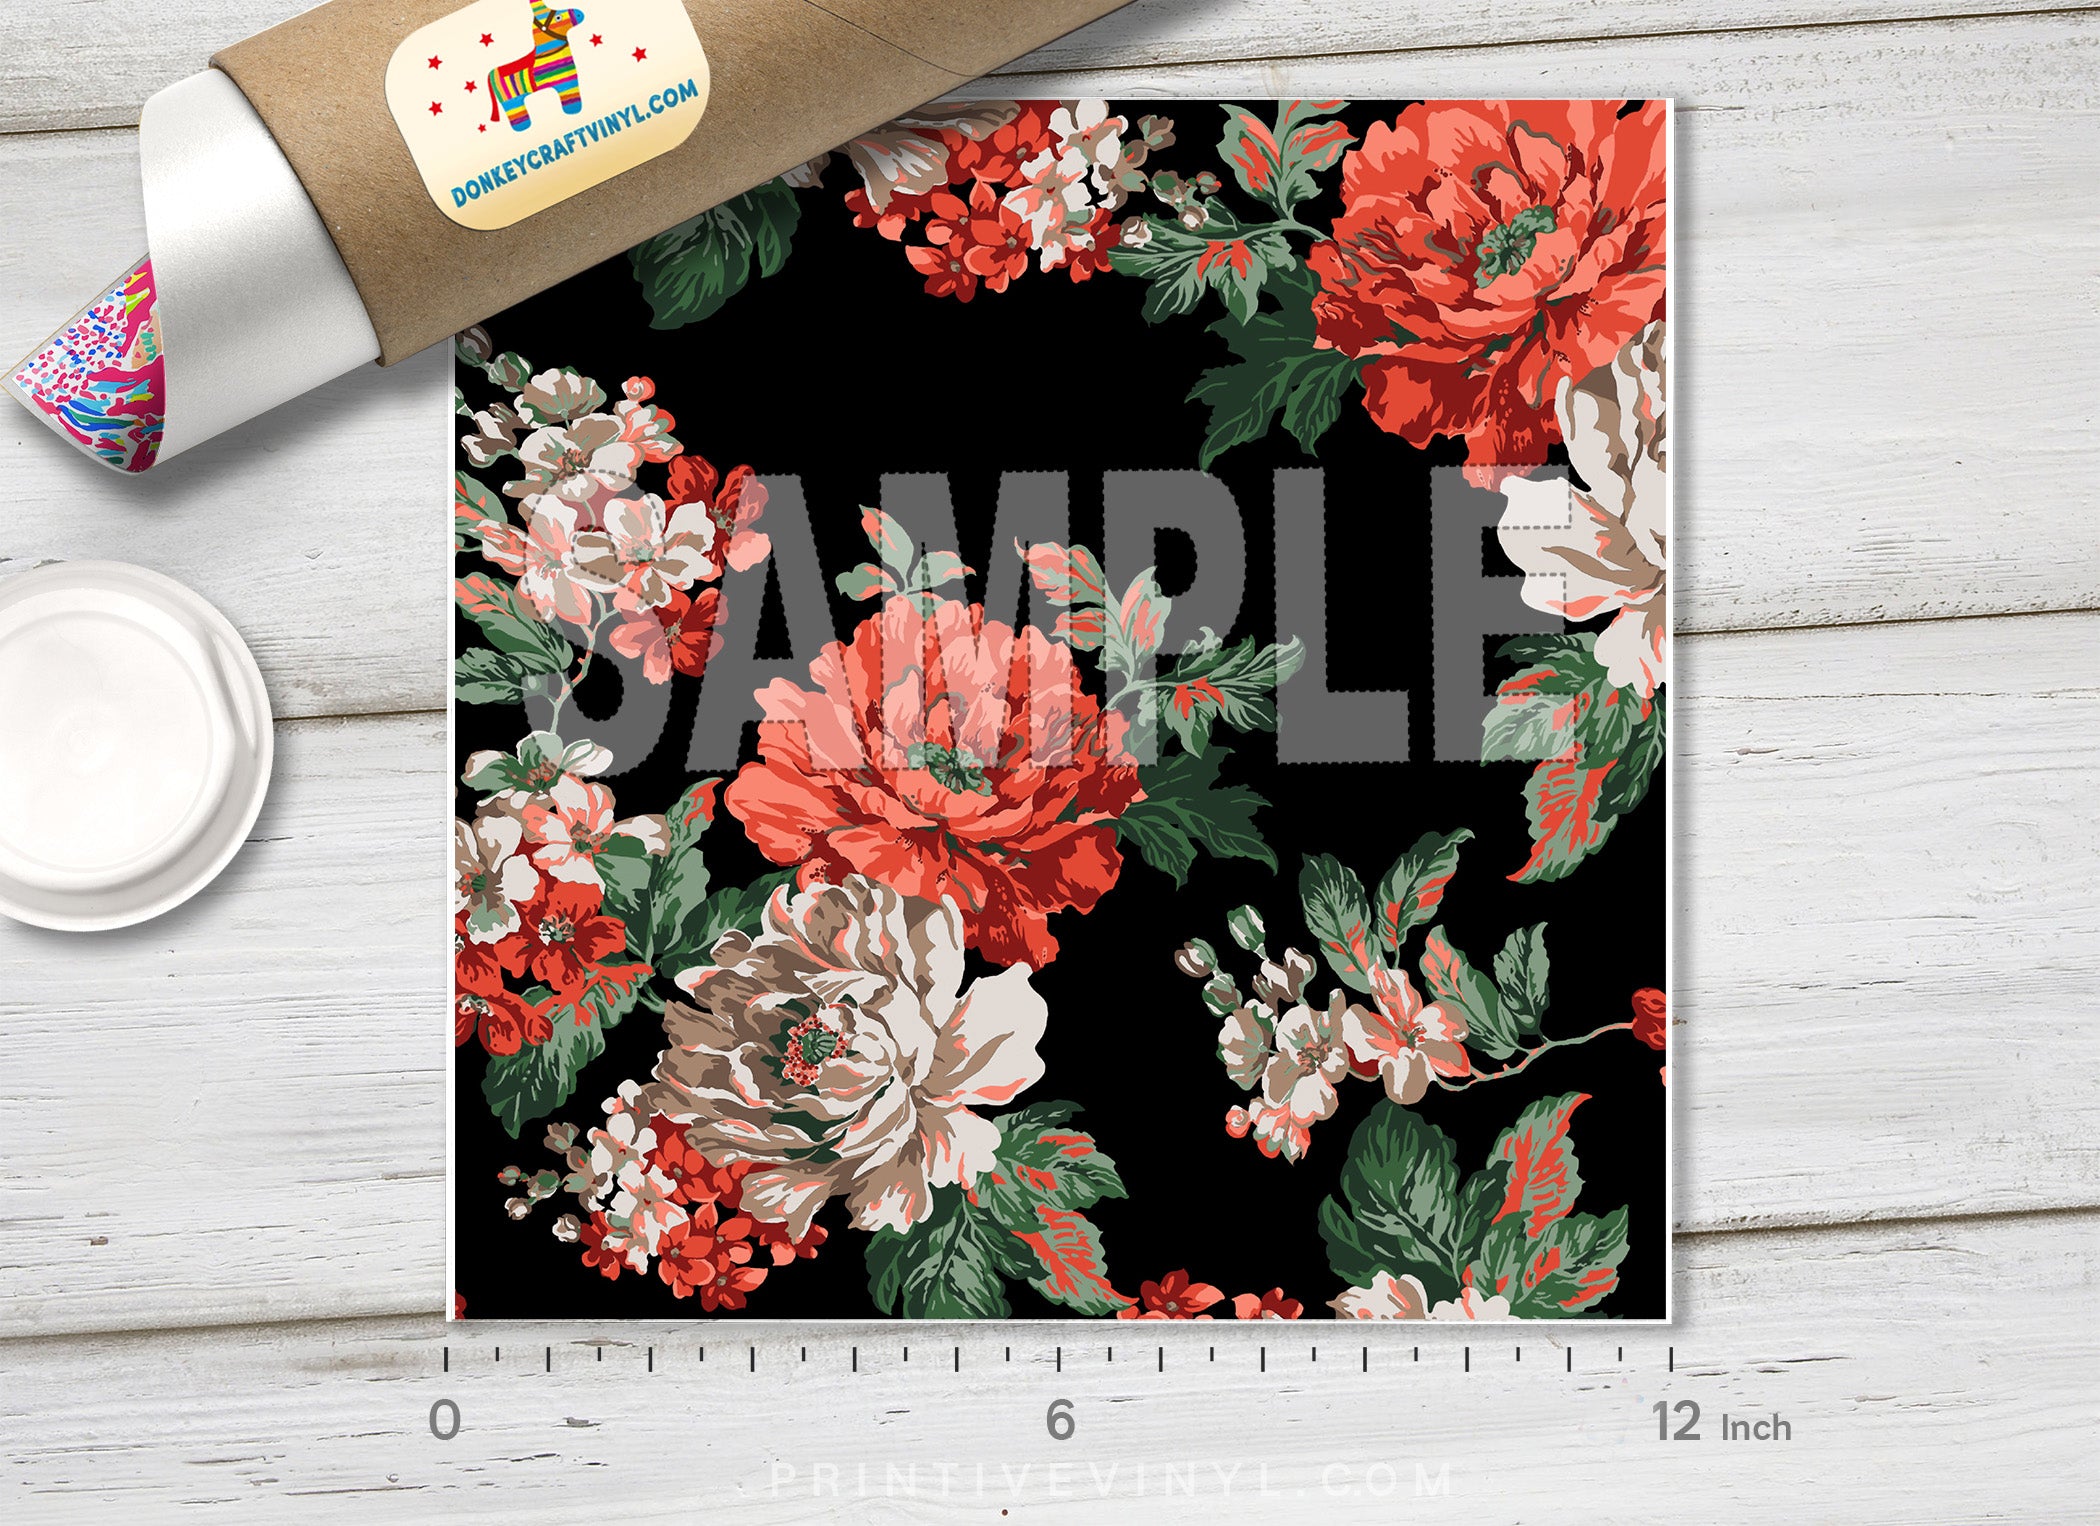 Flowers Patterned HTV 117